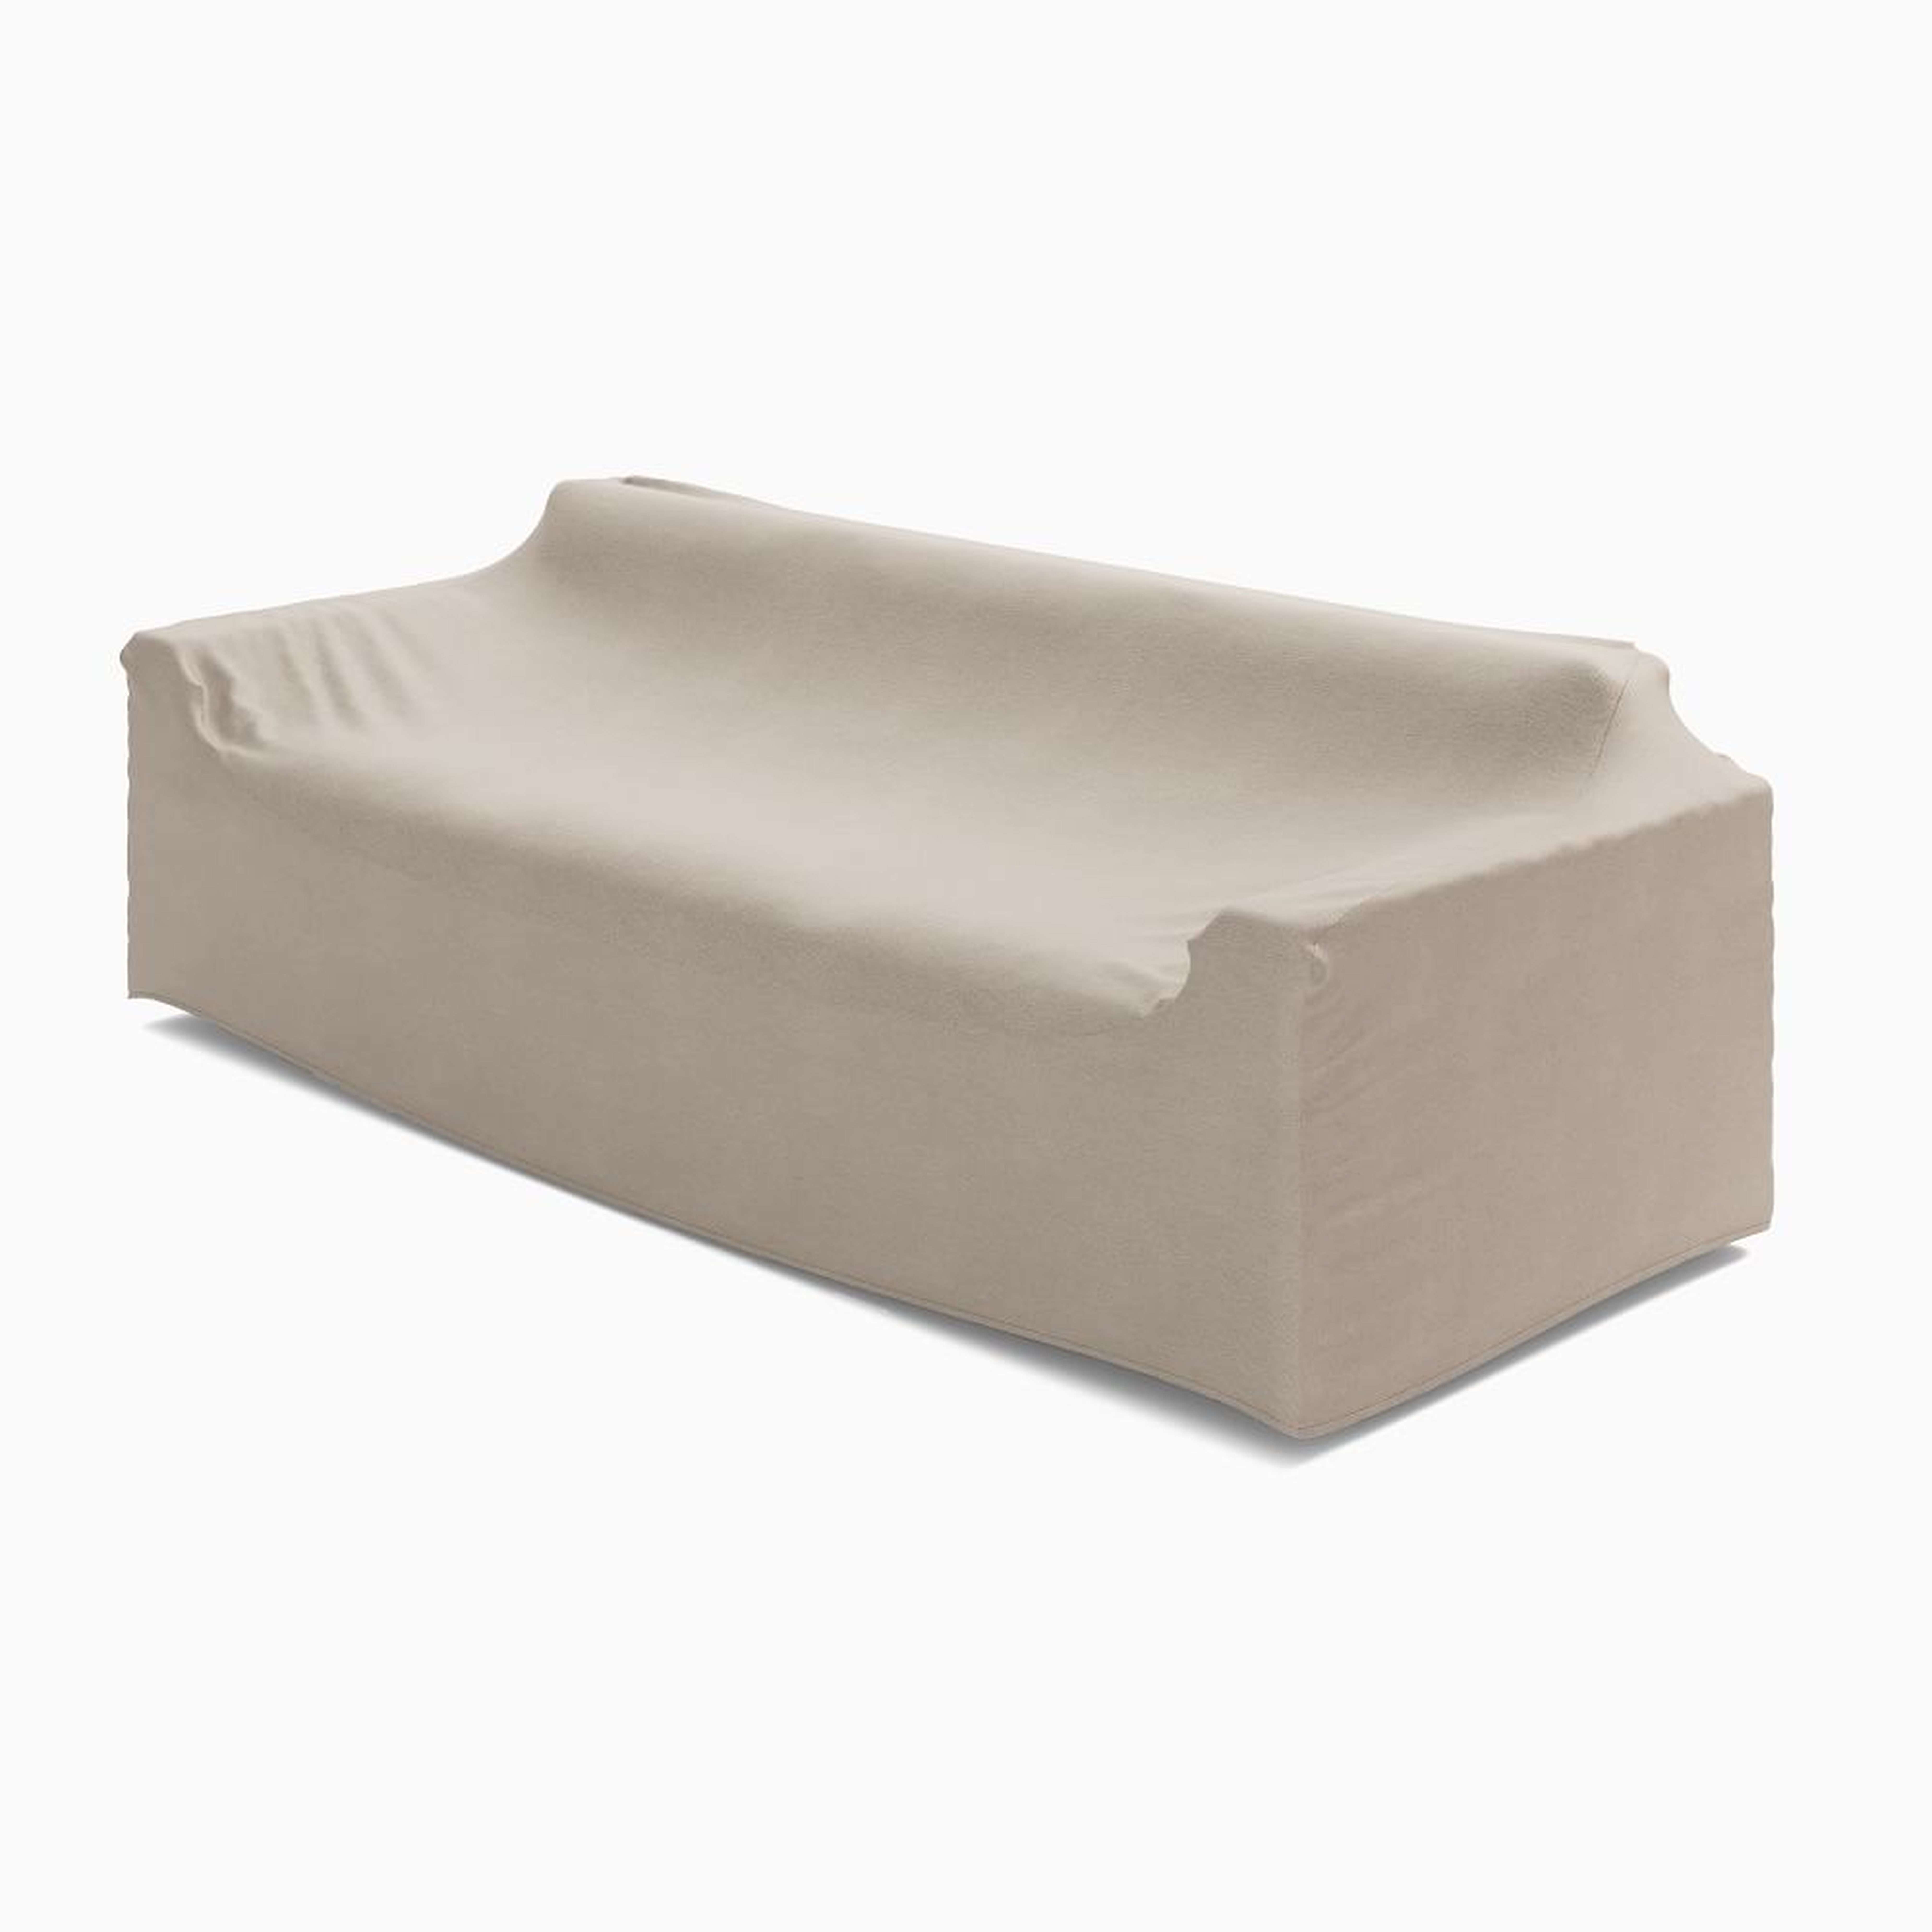 Portside Grand 85 Inch Sofa Protective Cover - West Elm